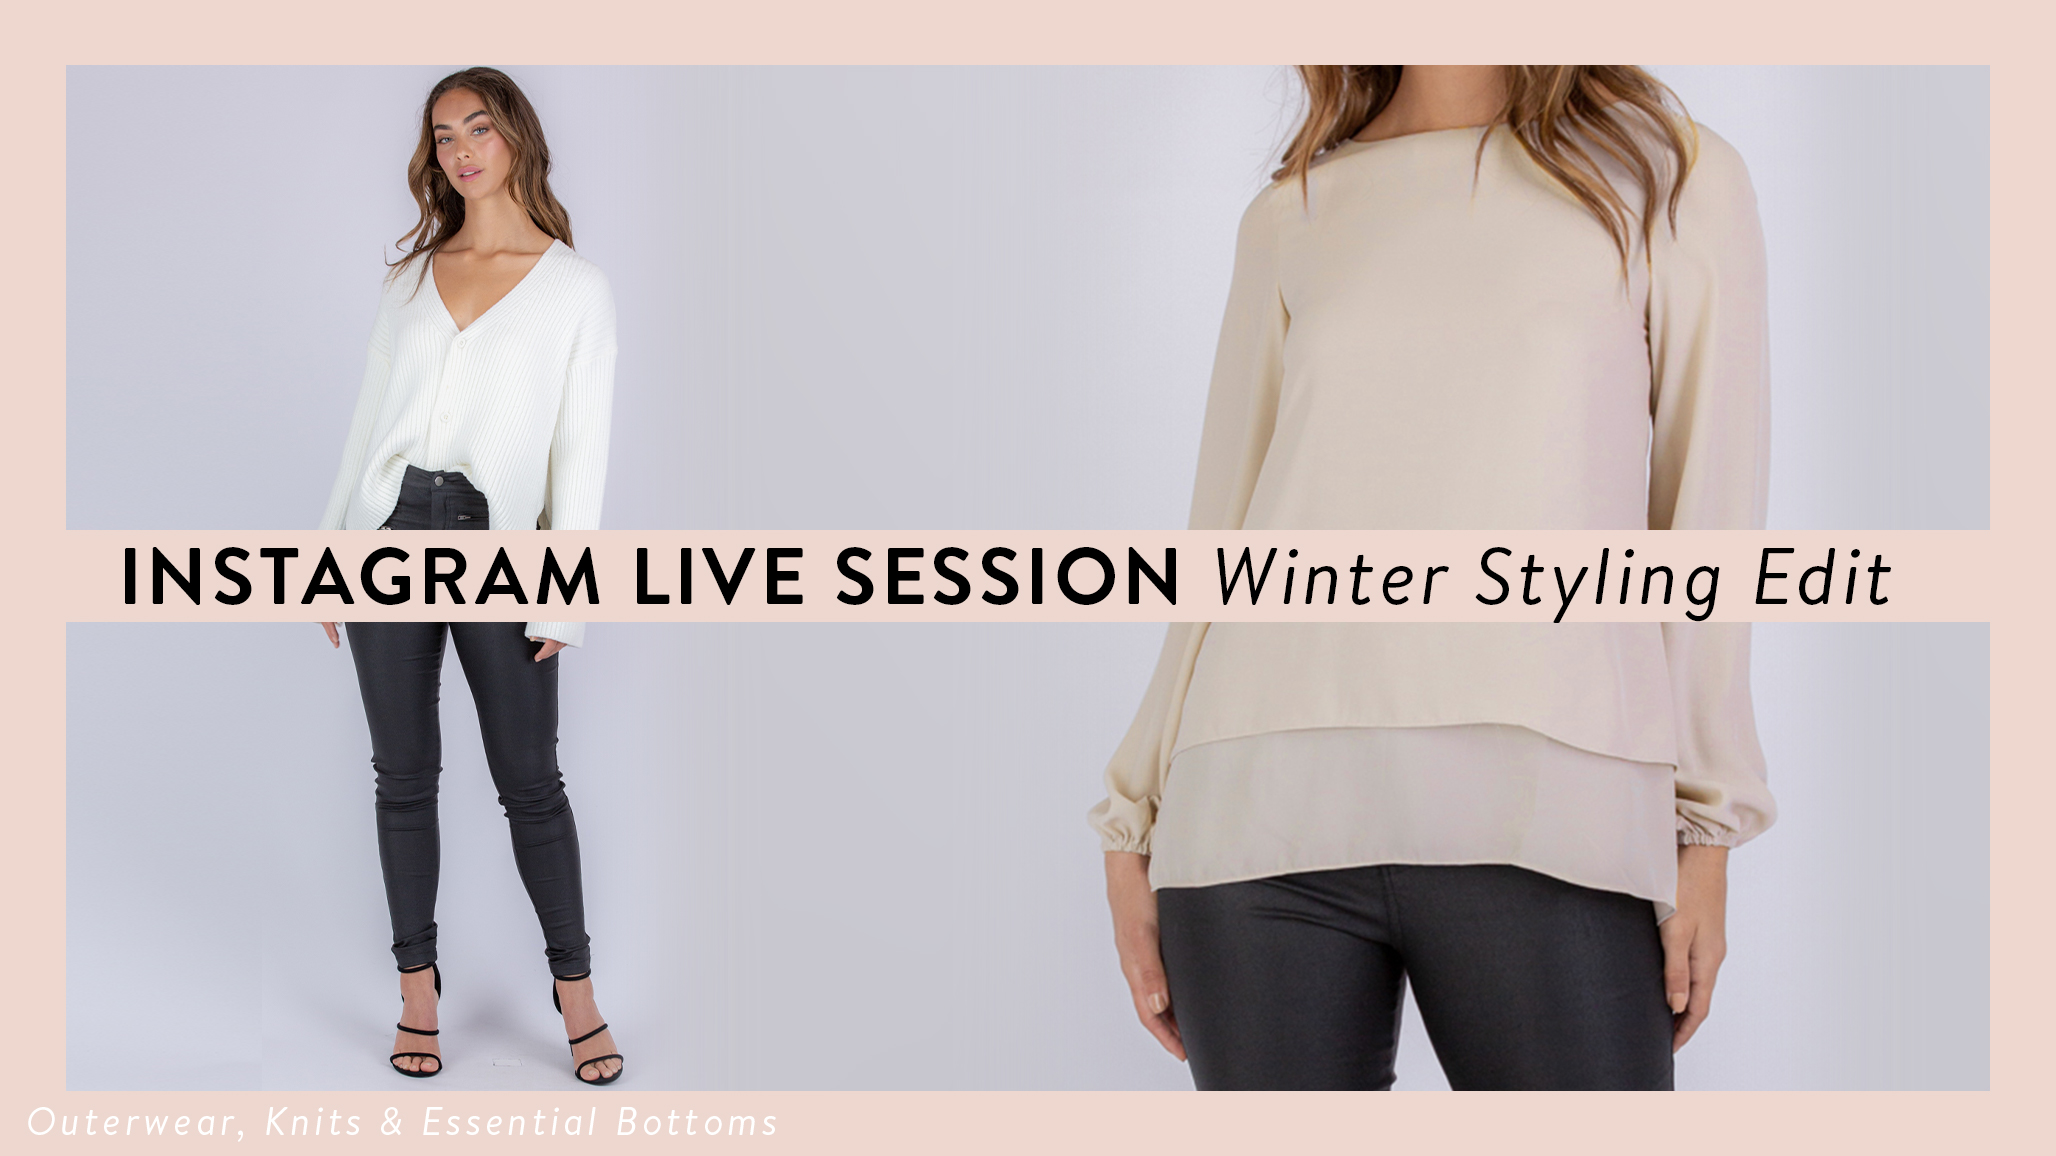 INSTAGRAM LIVE SESSION: Winter Styling Edit